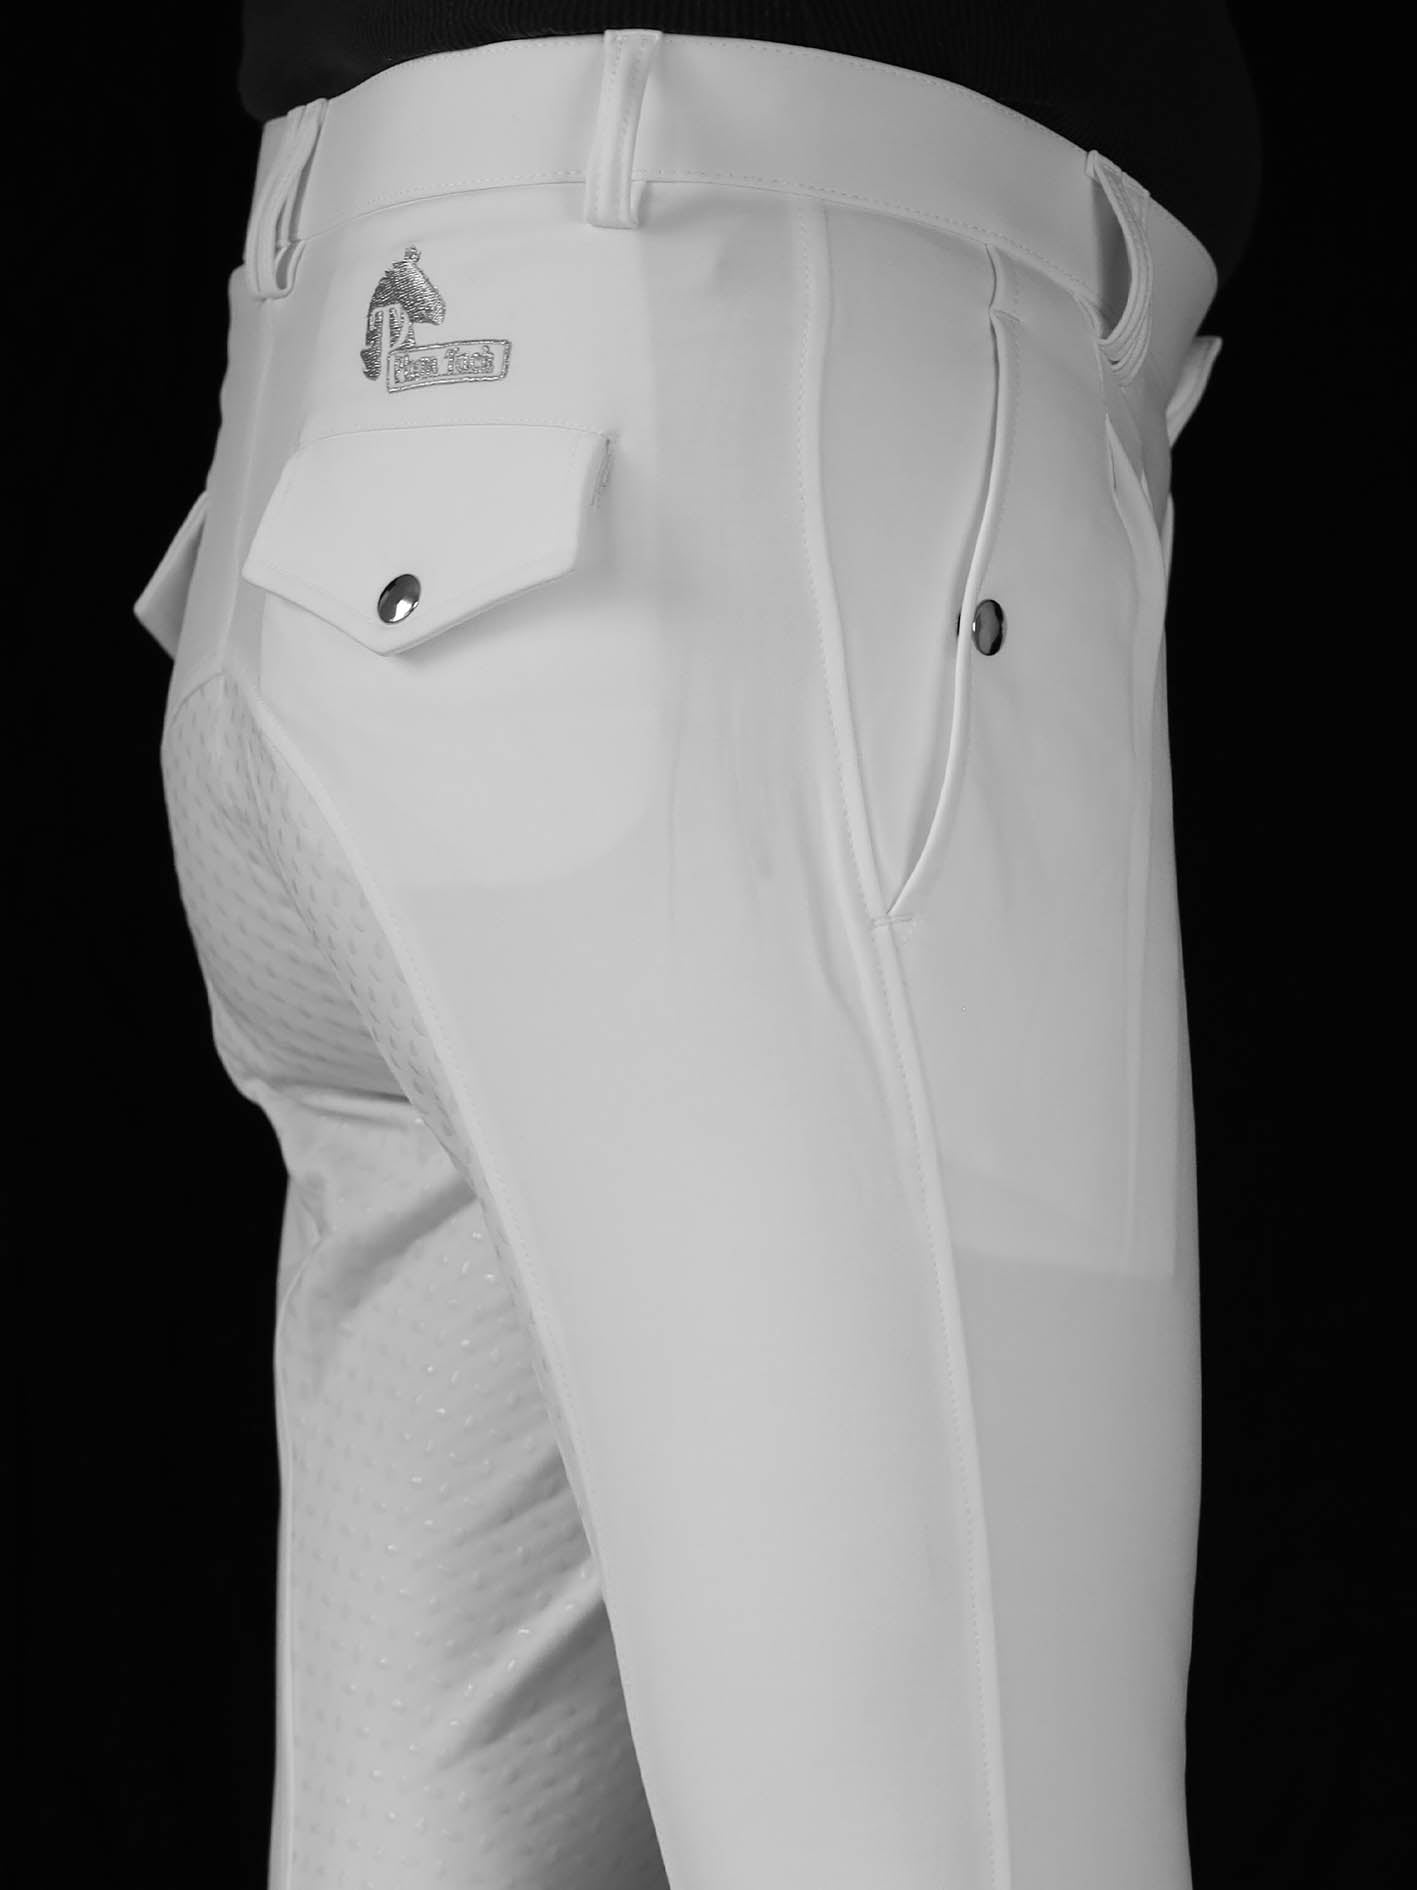 Men's white competition breeches close up of side